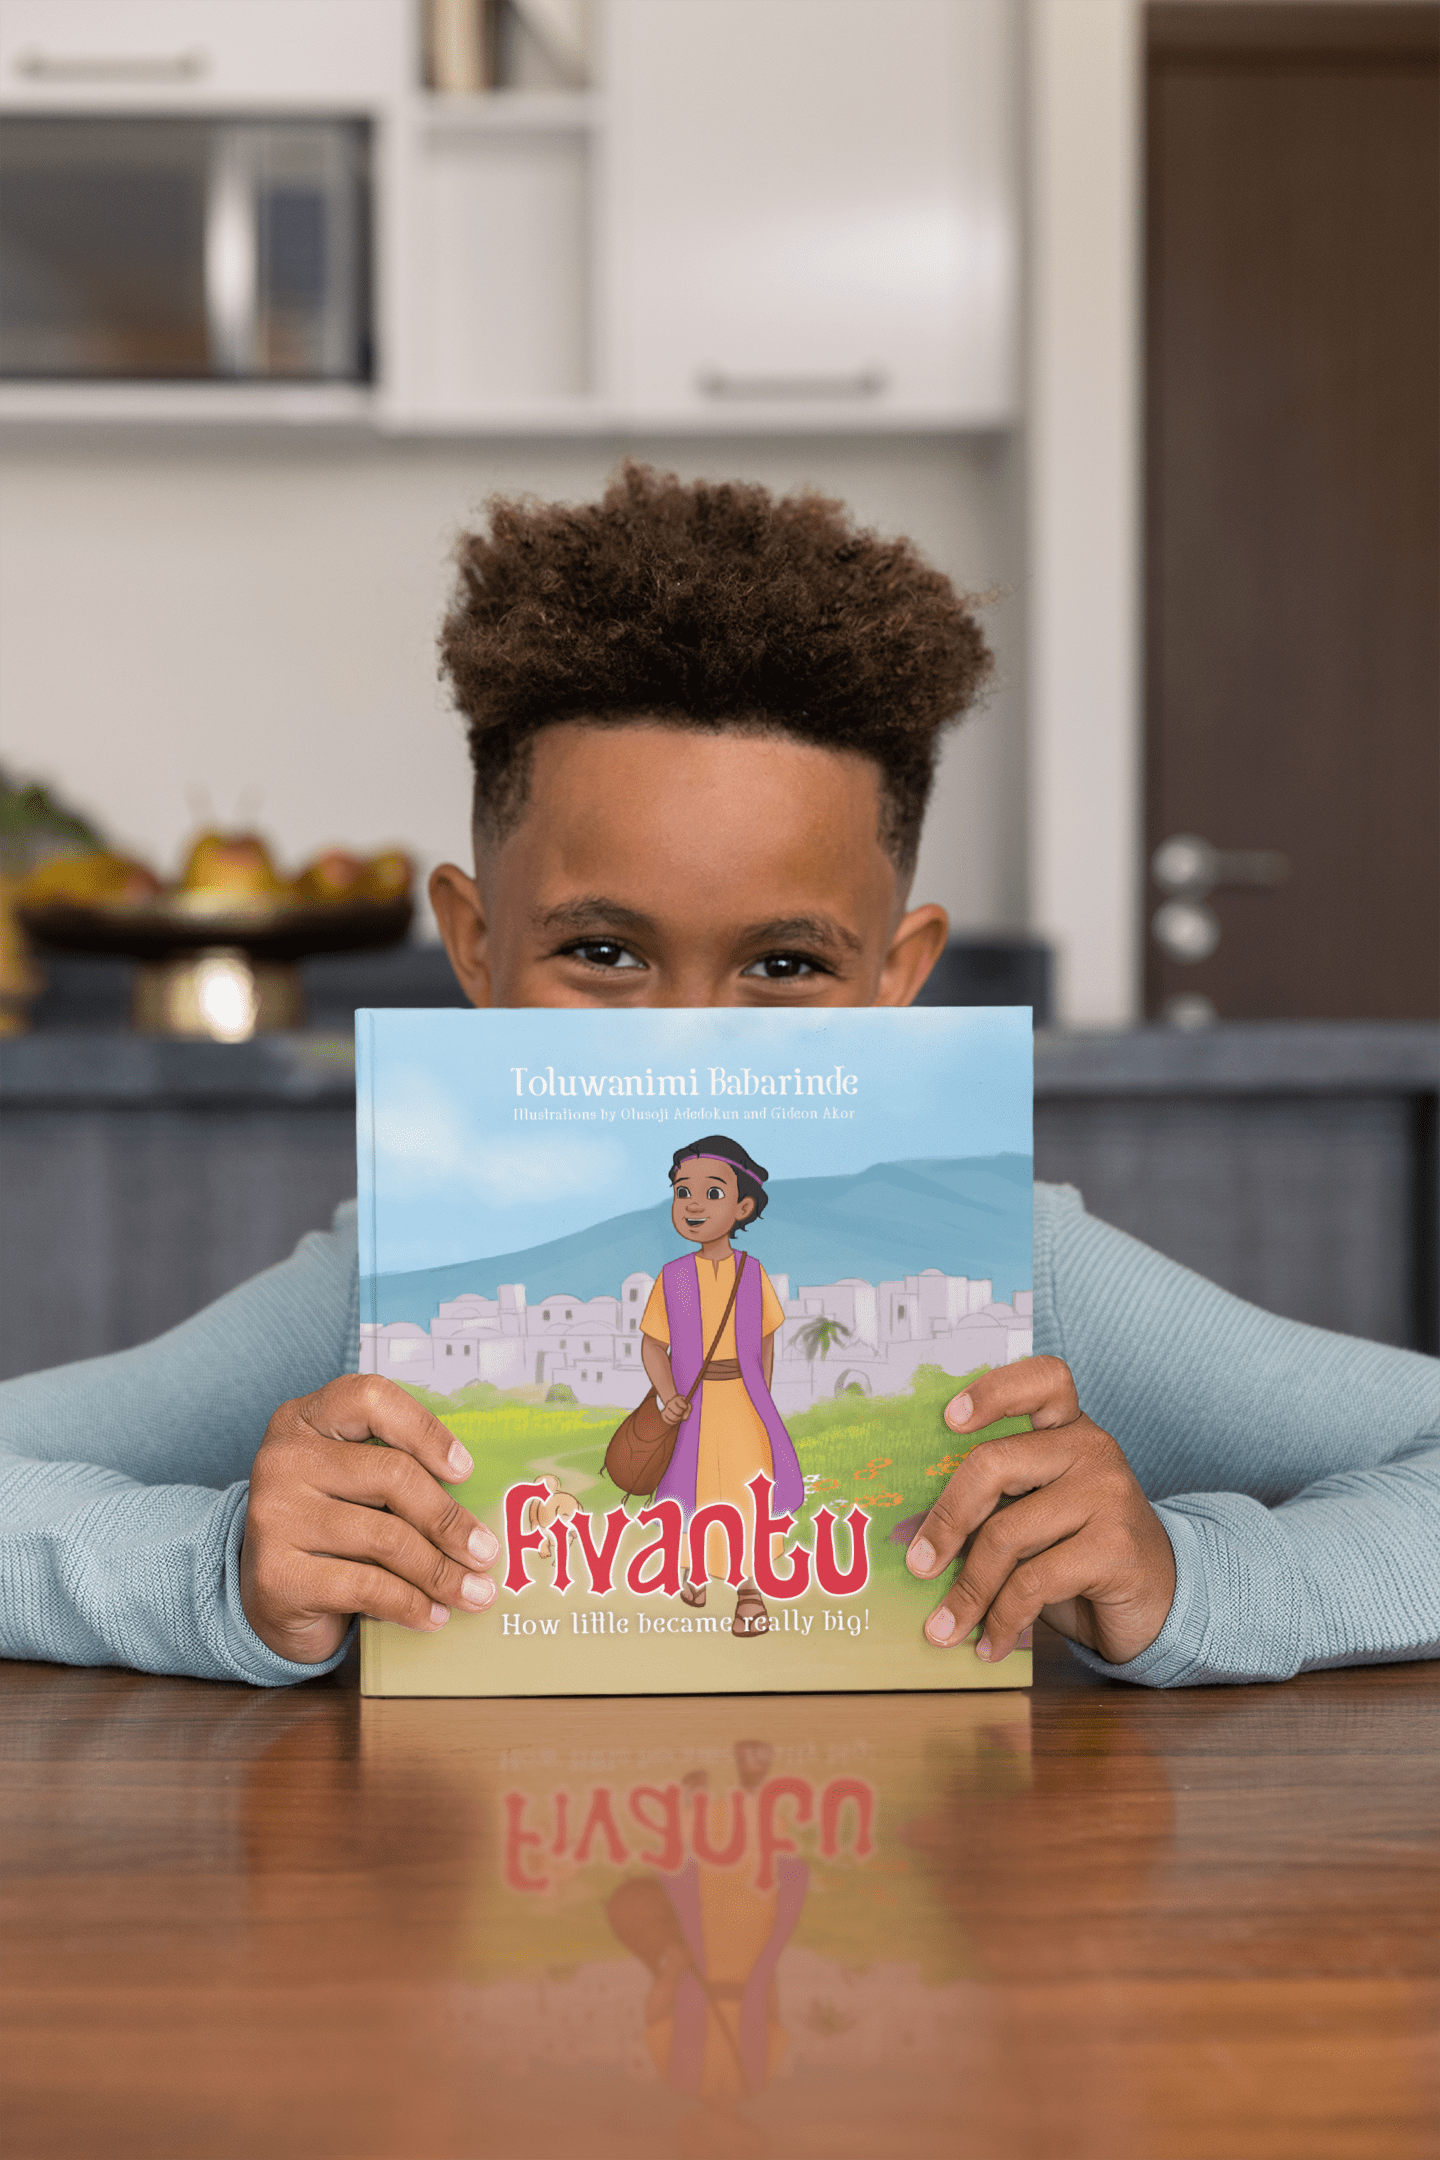 A new children’s book about courage and faith